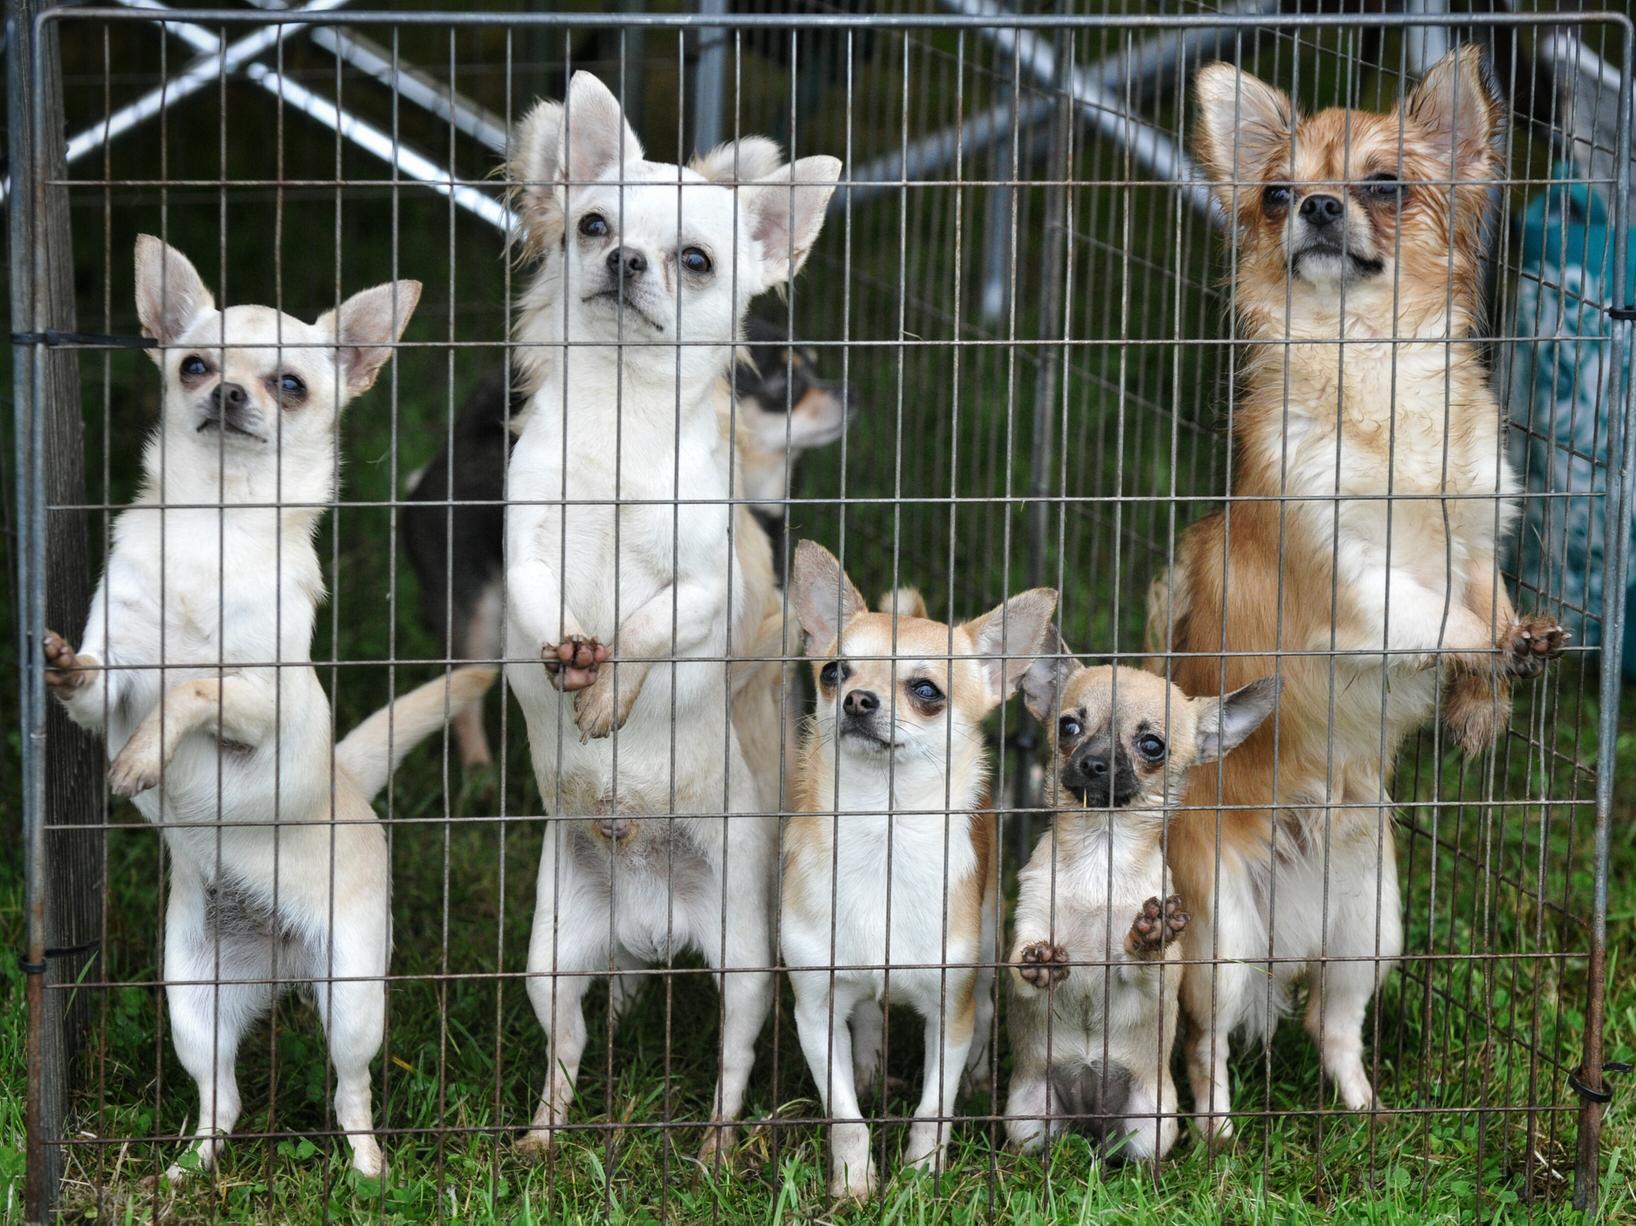 10 Chihuahuas were stolen in 2019, according to figures.